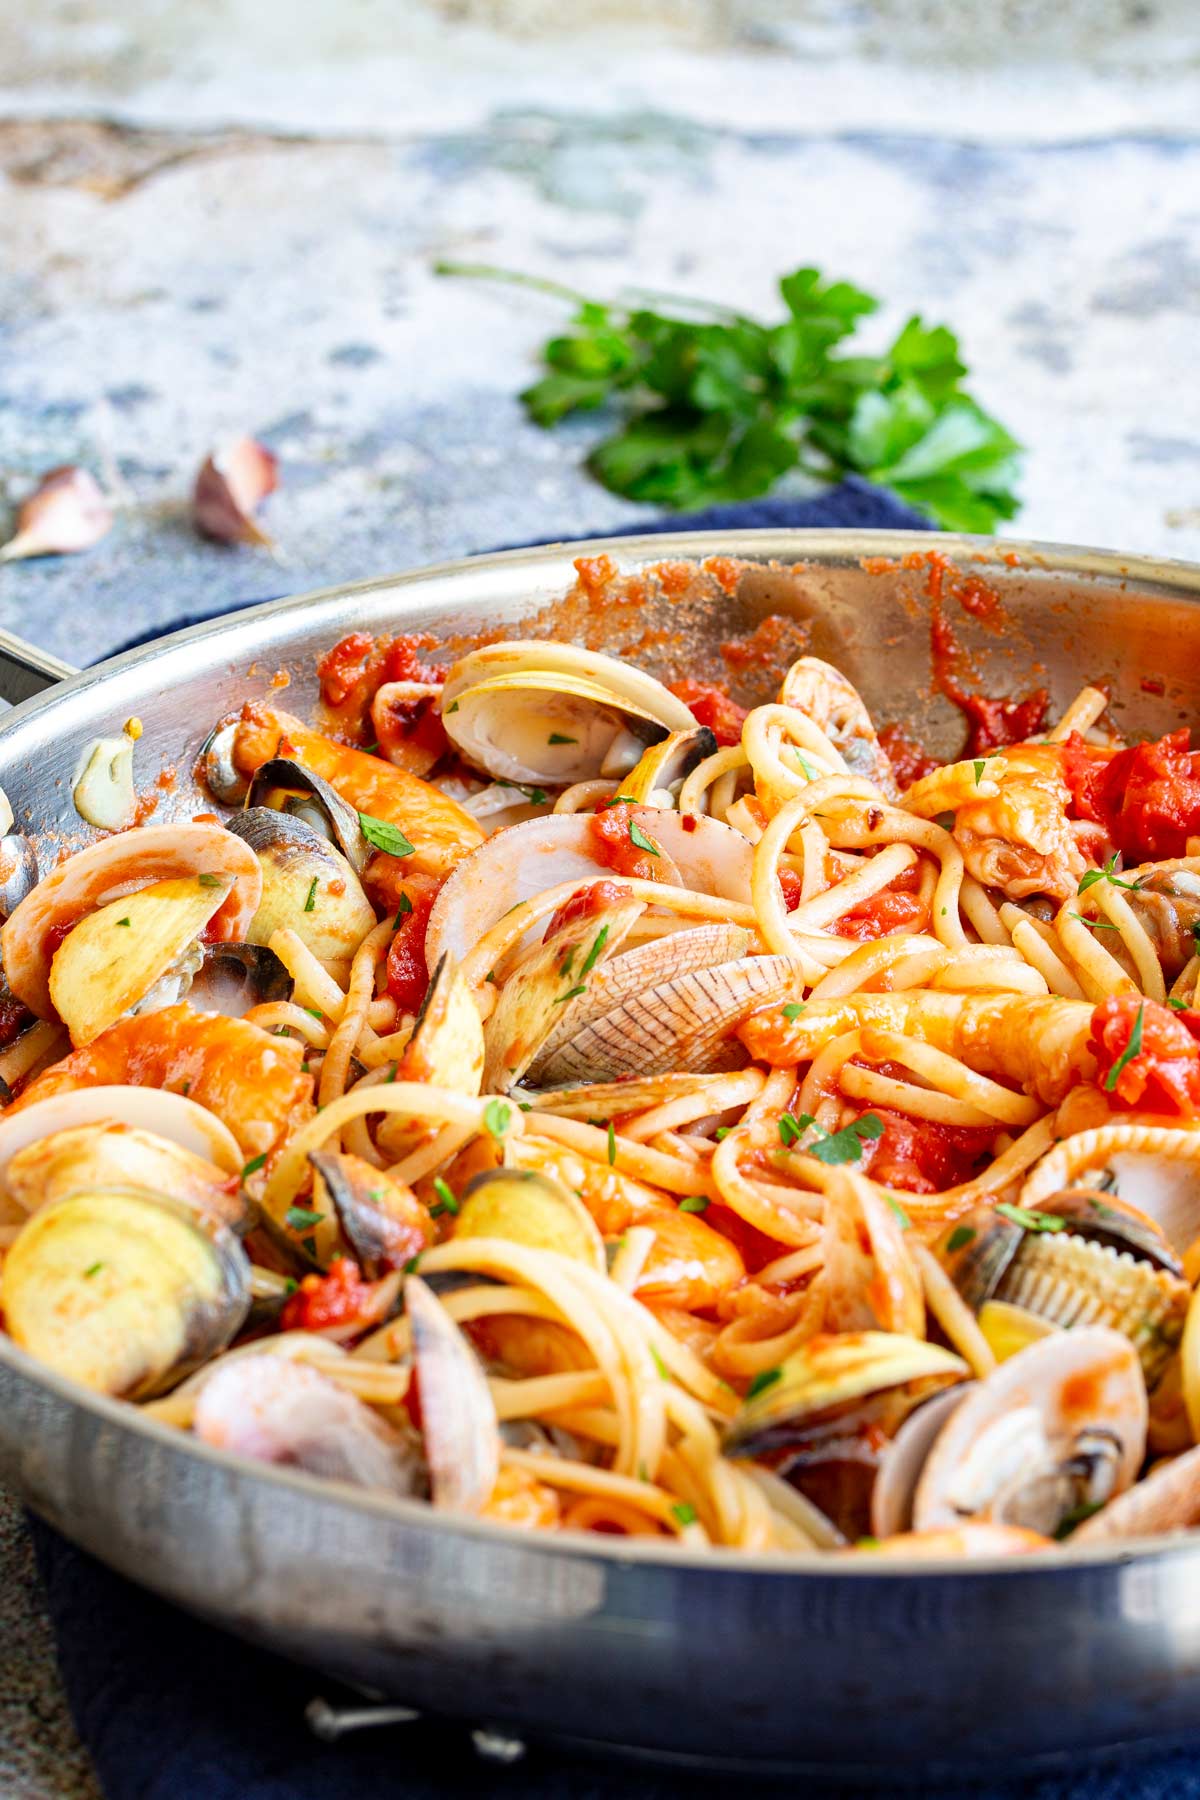 a silver skillet filled with pasta and seafood on a stone table